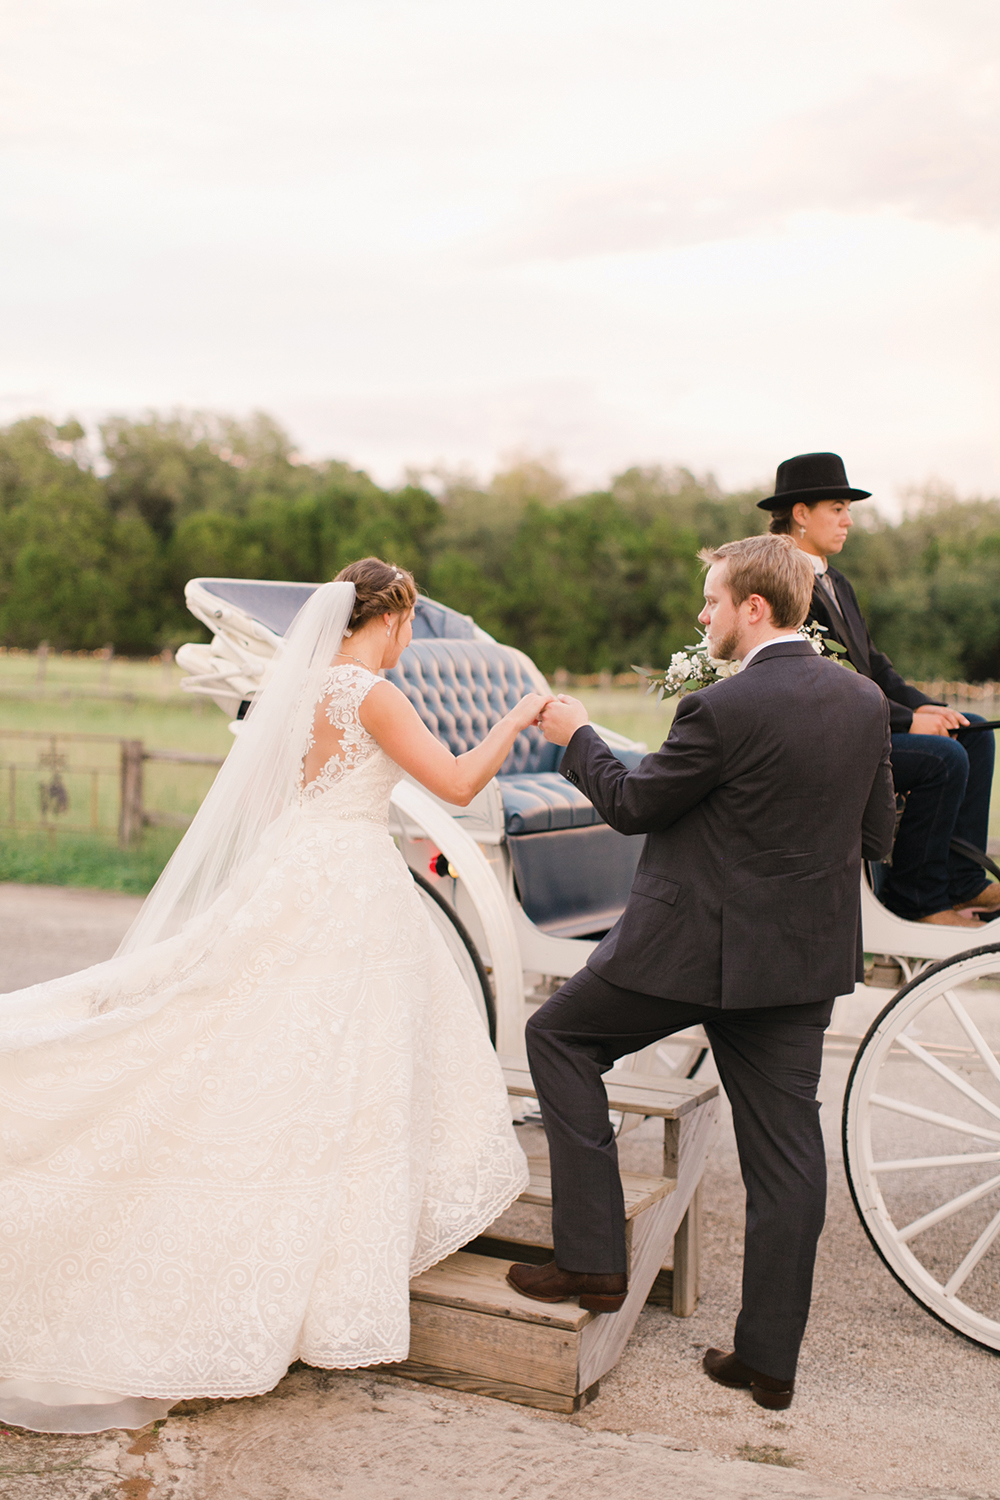 leaving the ceremony - horsedrawn carriage